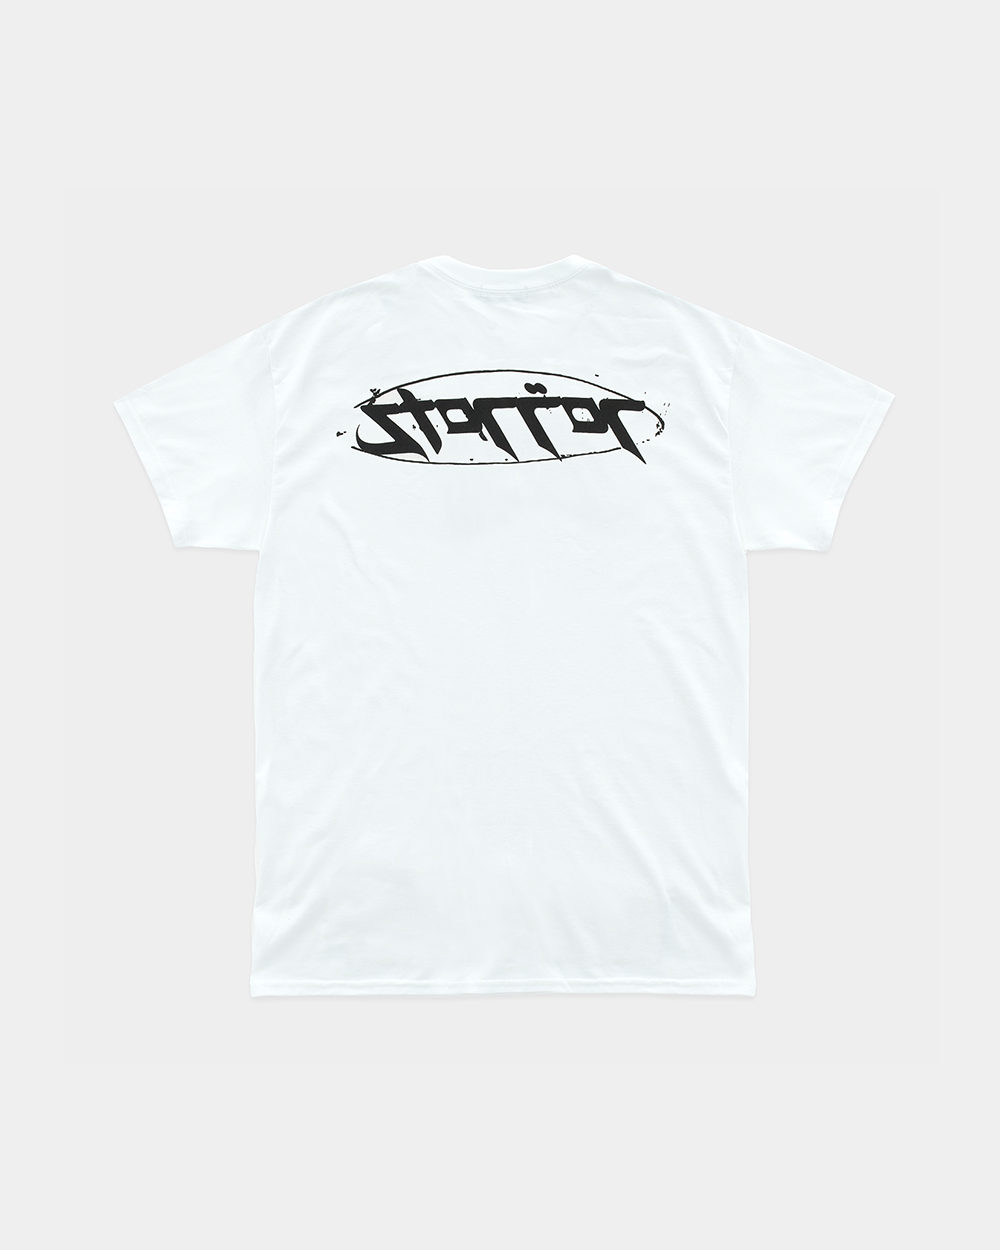 DYSTOPIA T-SHIRT | STORROR | parkour clothing & technical sportswear